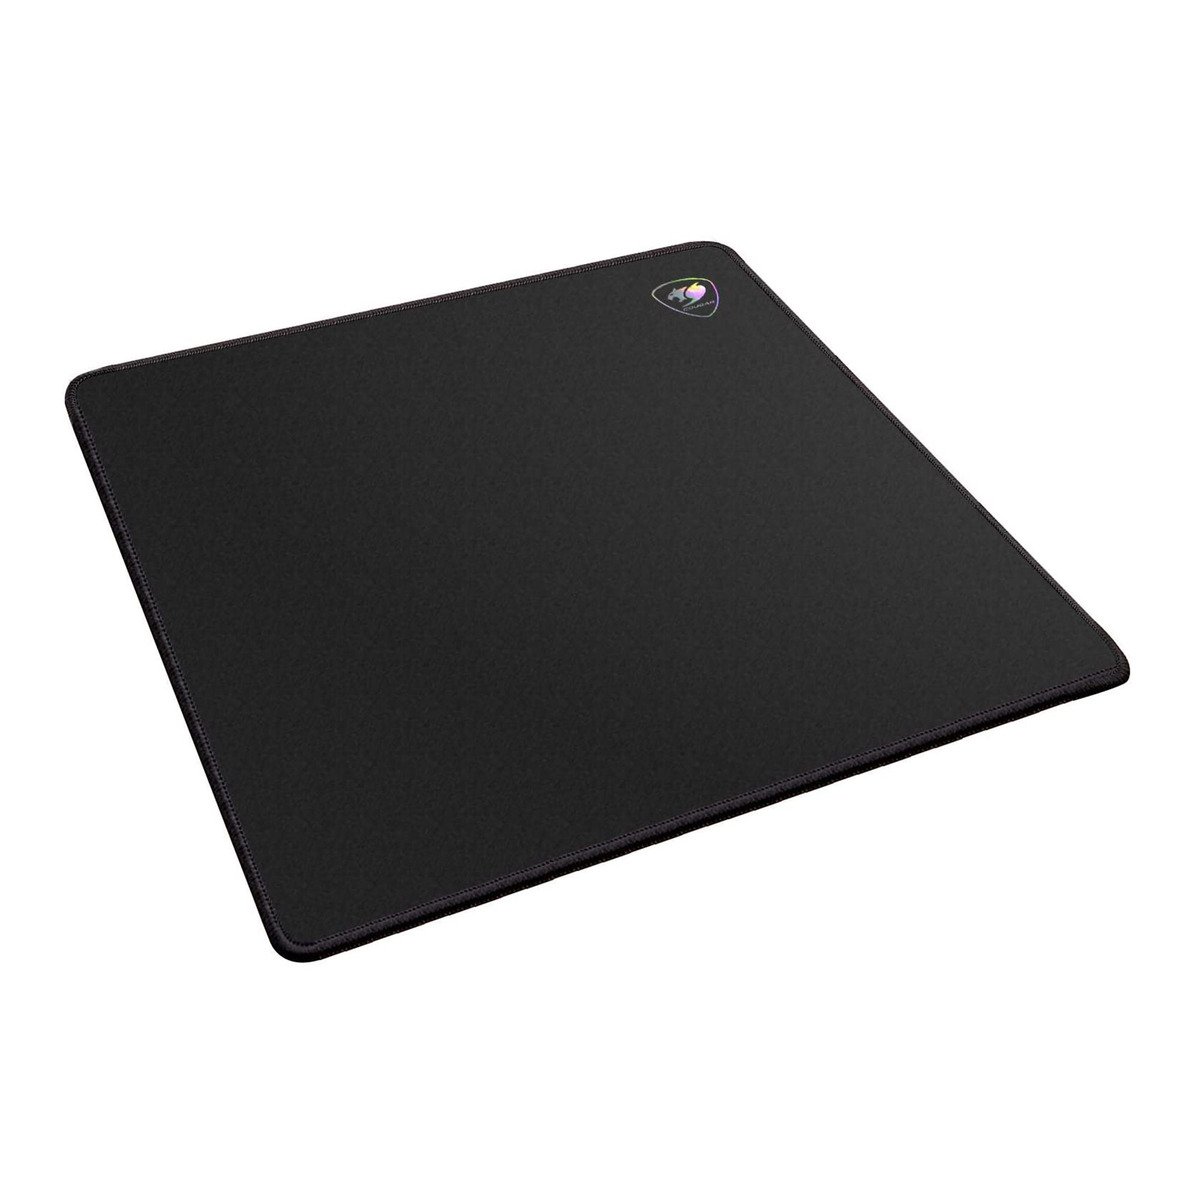 Cougar Mouse Pad SPEED EX-L Black